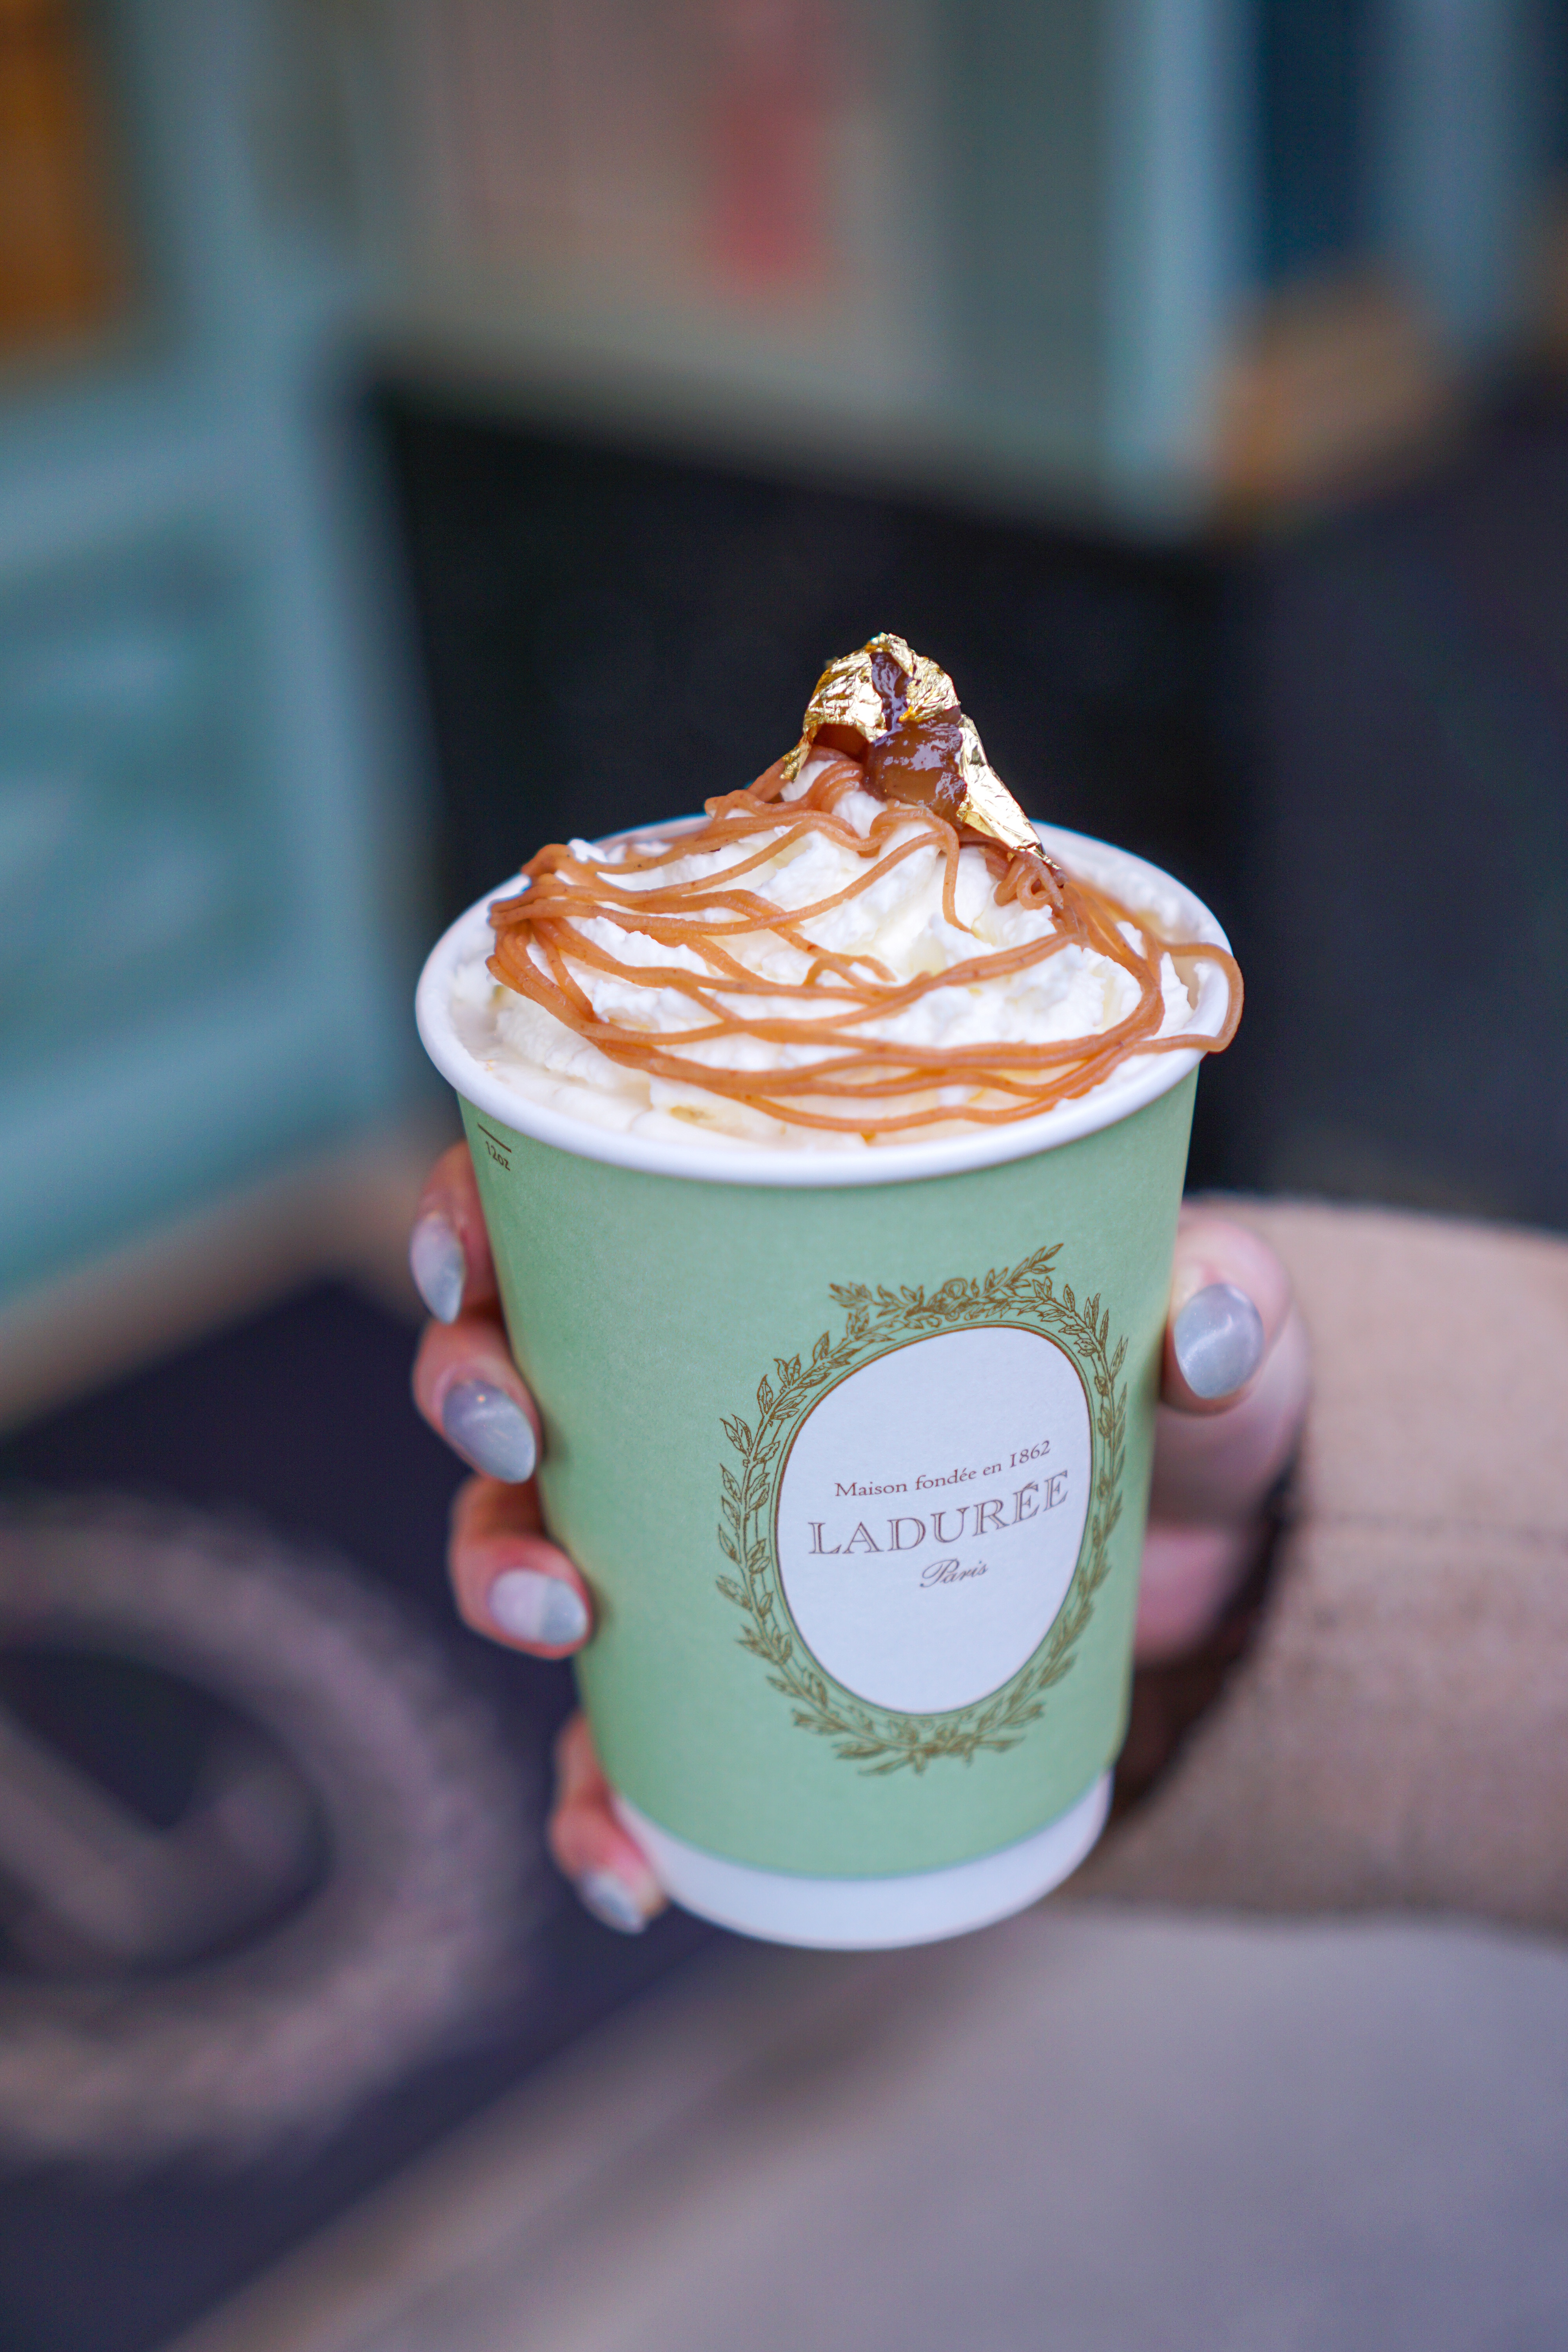 $15 mont blanc hot chocolate from laduree vancouver for hot chocolate festival